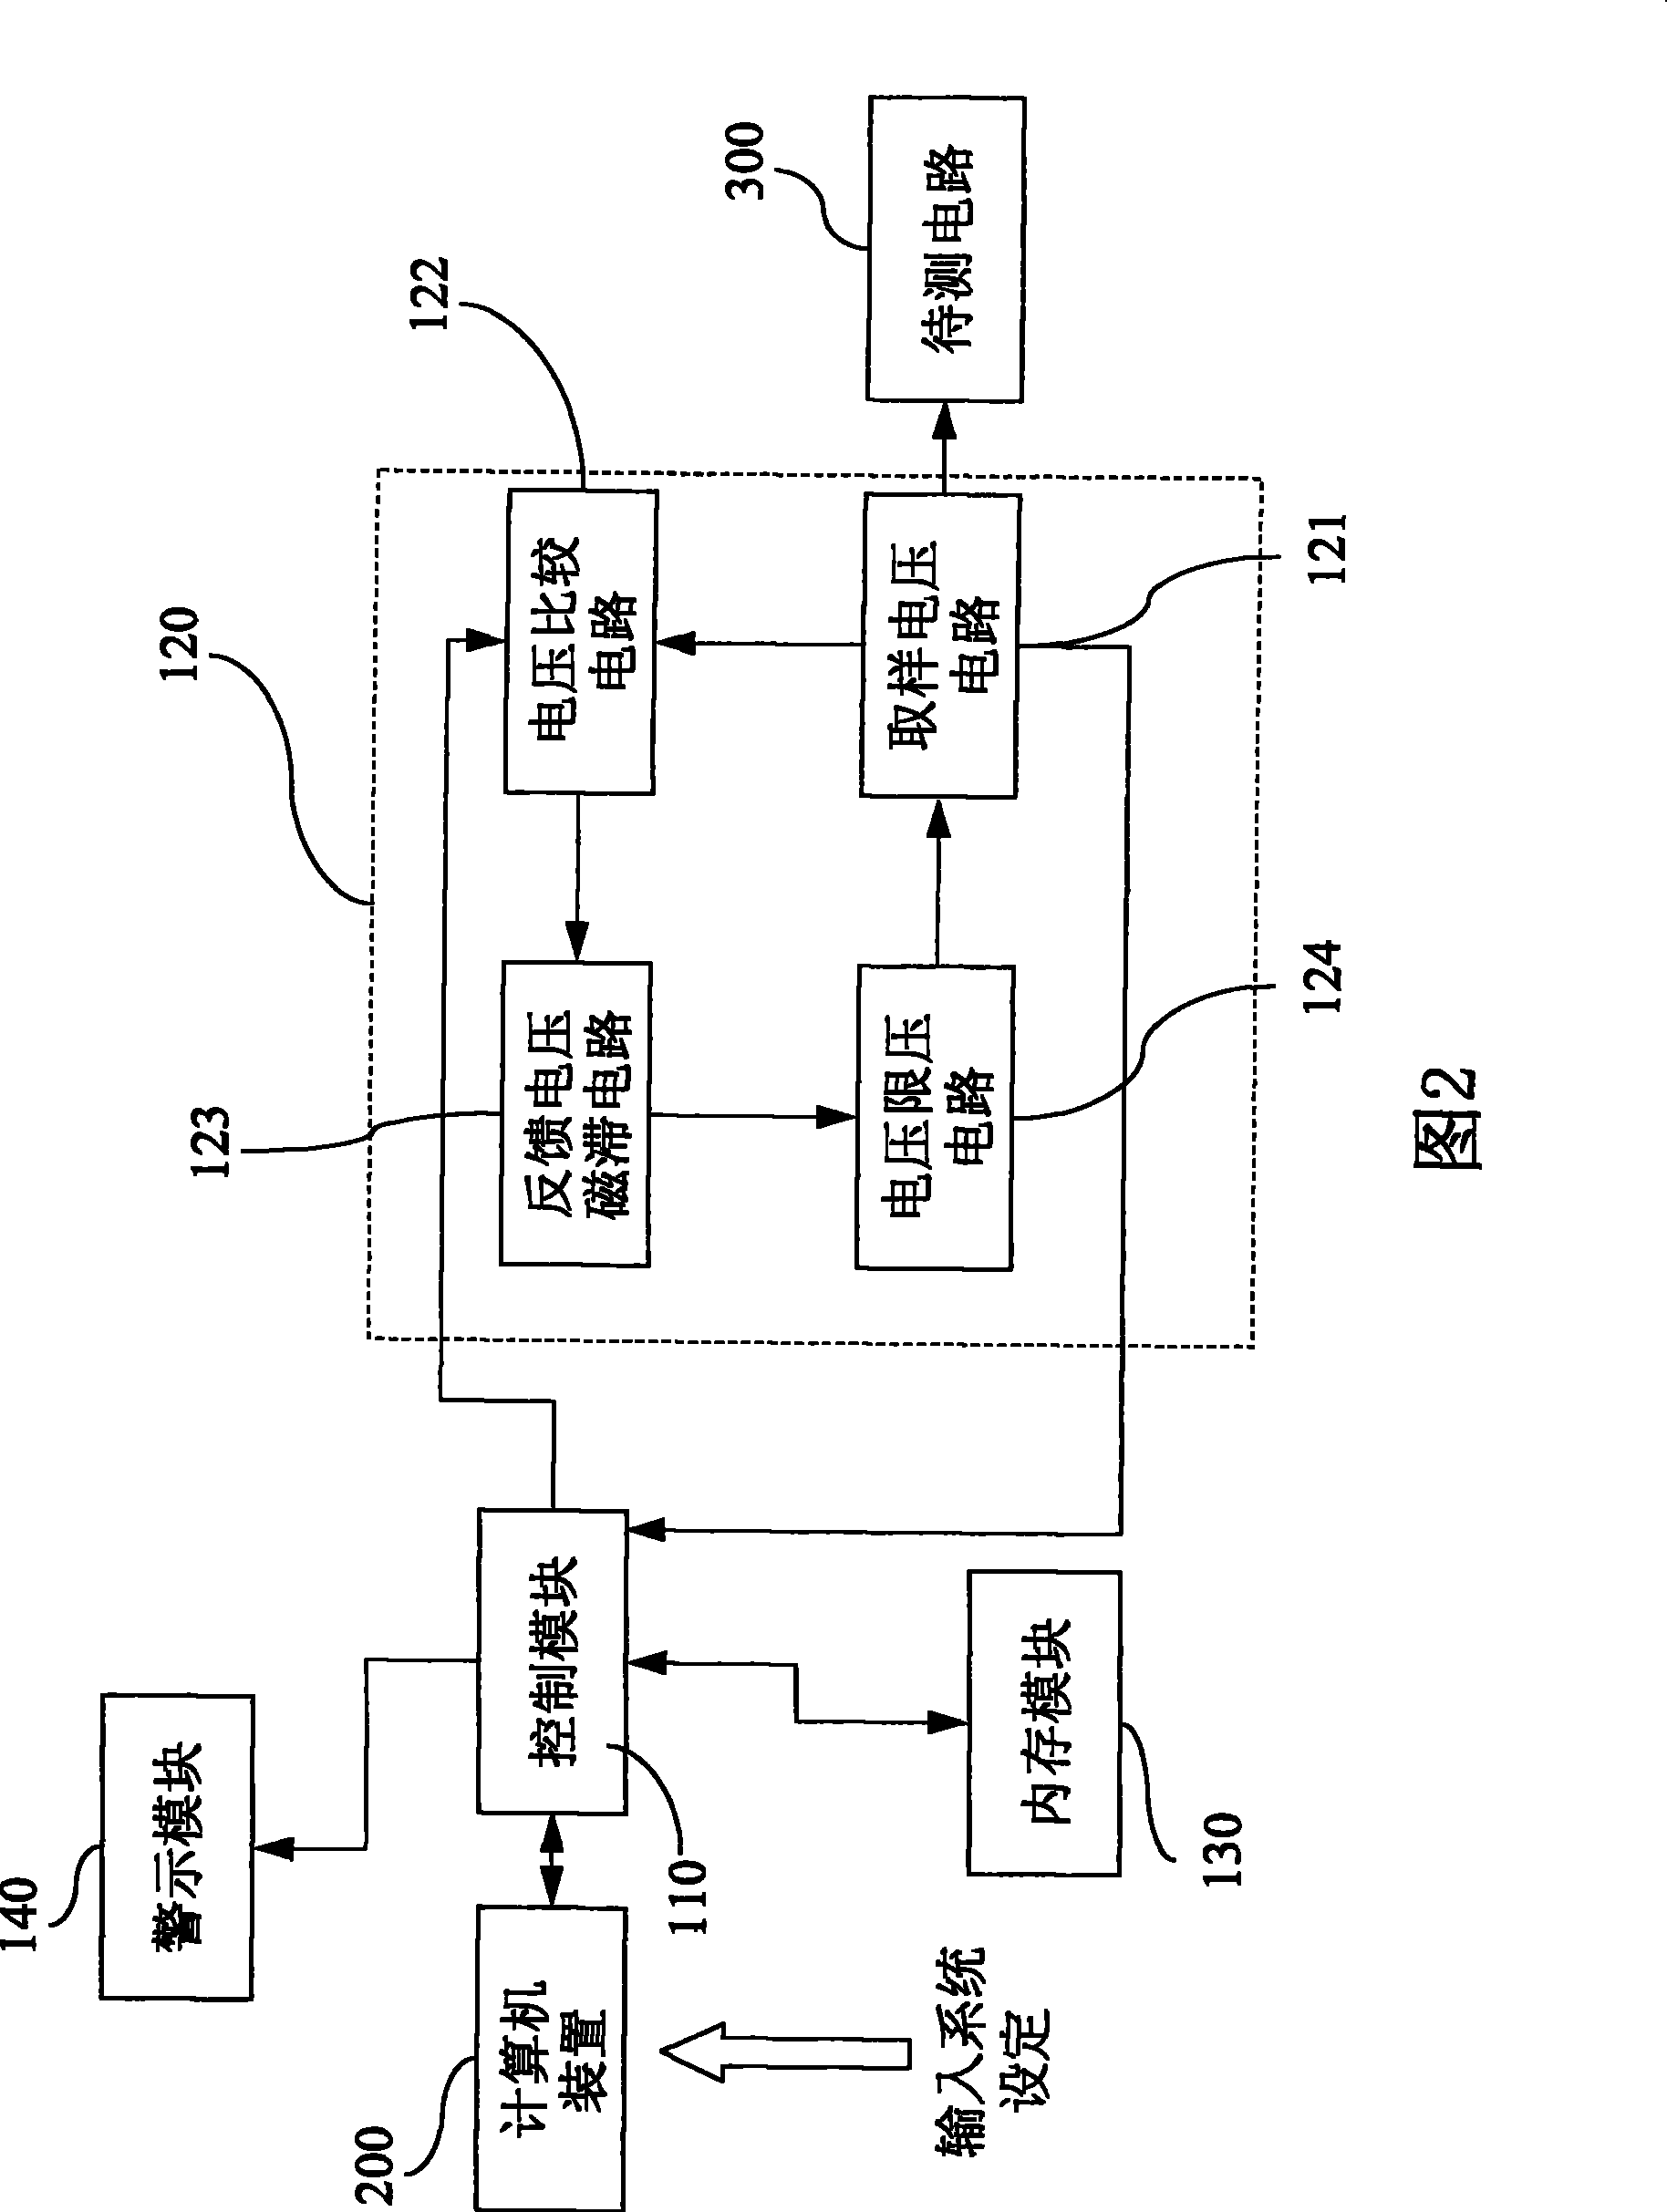 Active mode current detecting system